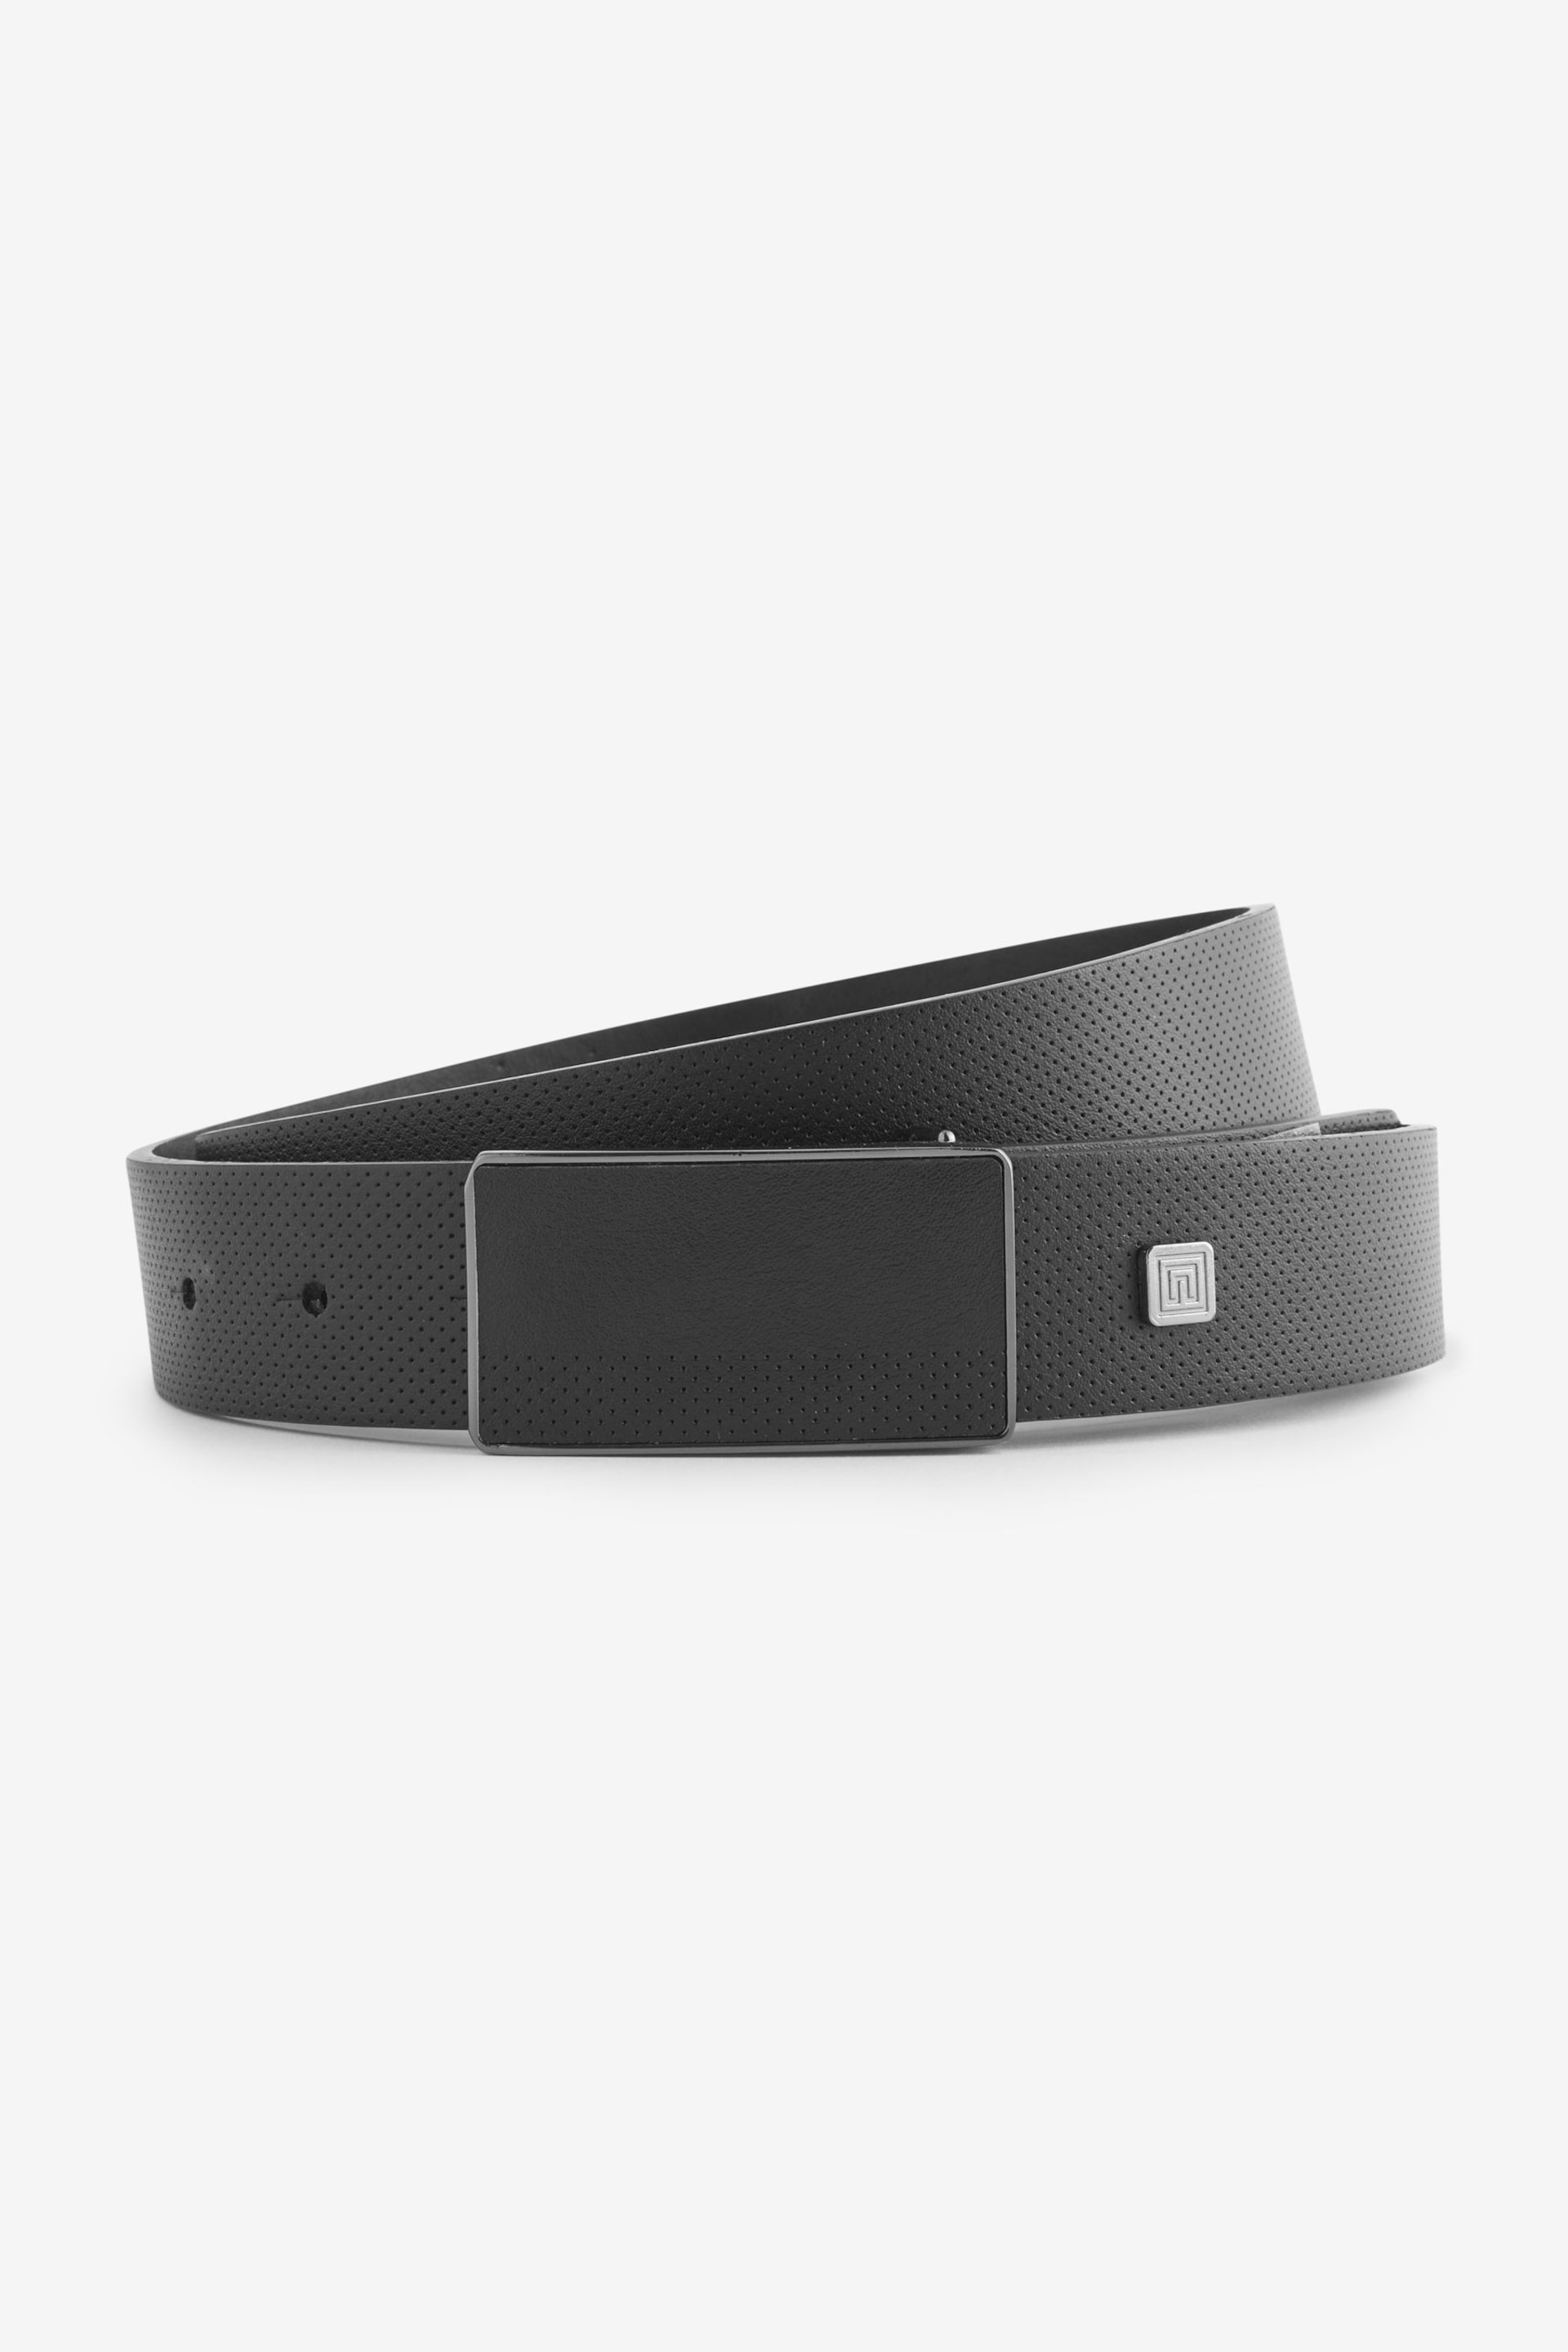 Black Perforated Plaque Belt - Image 2 of 3